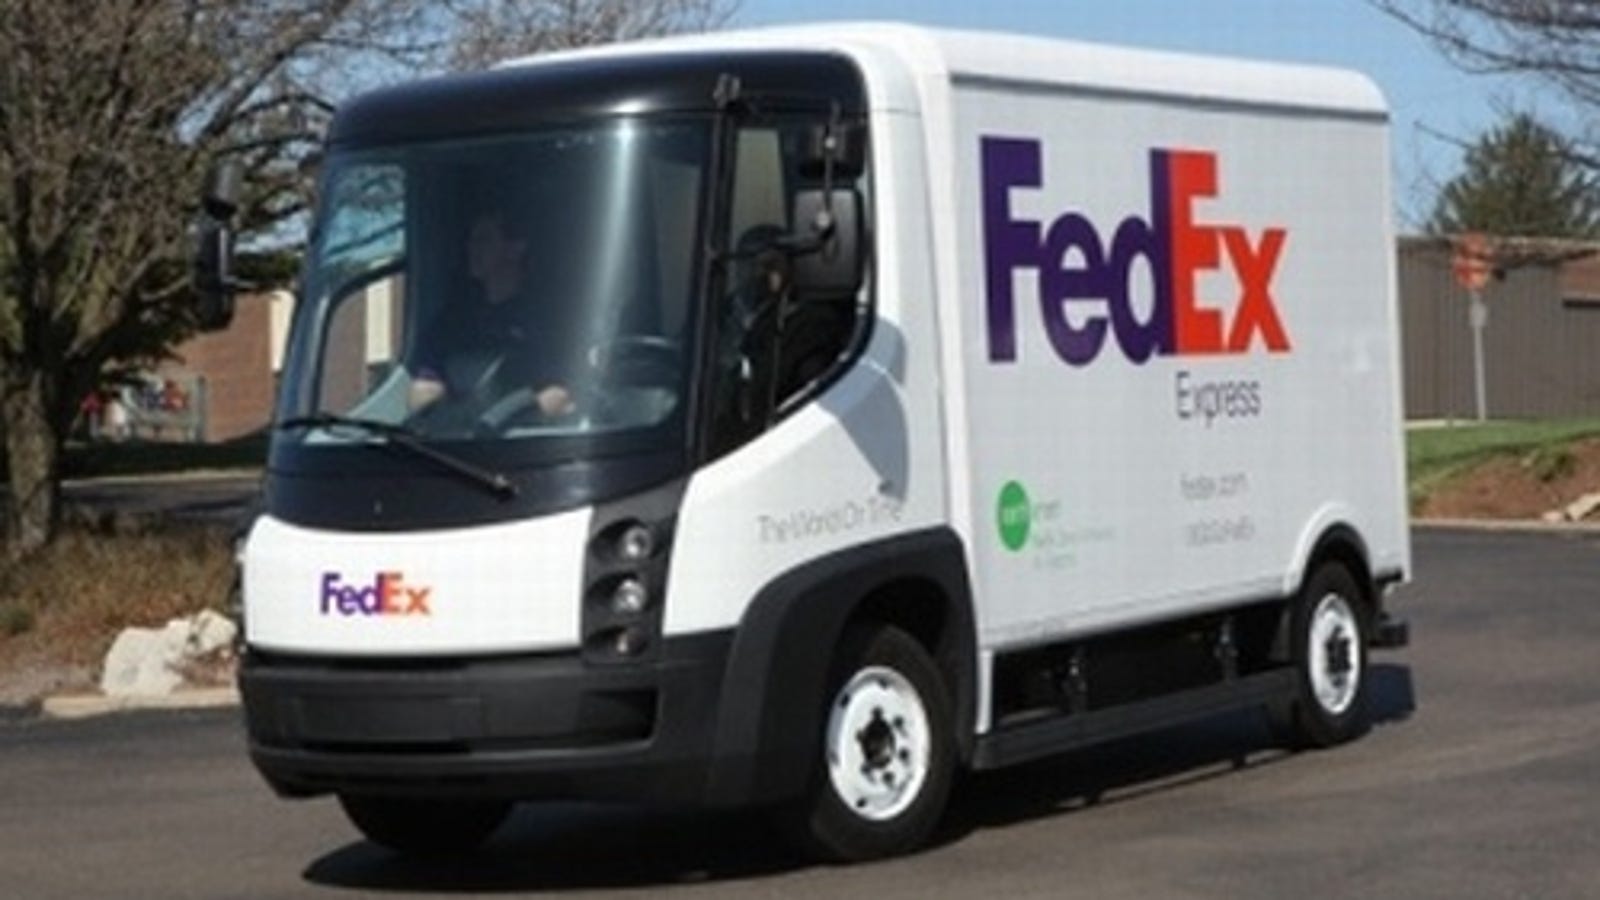 The Electric FedEx Truck Coming Soon To A Door Near You